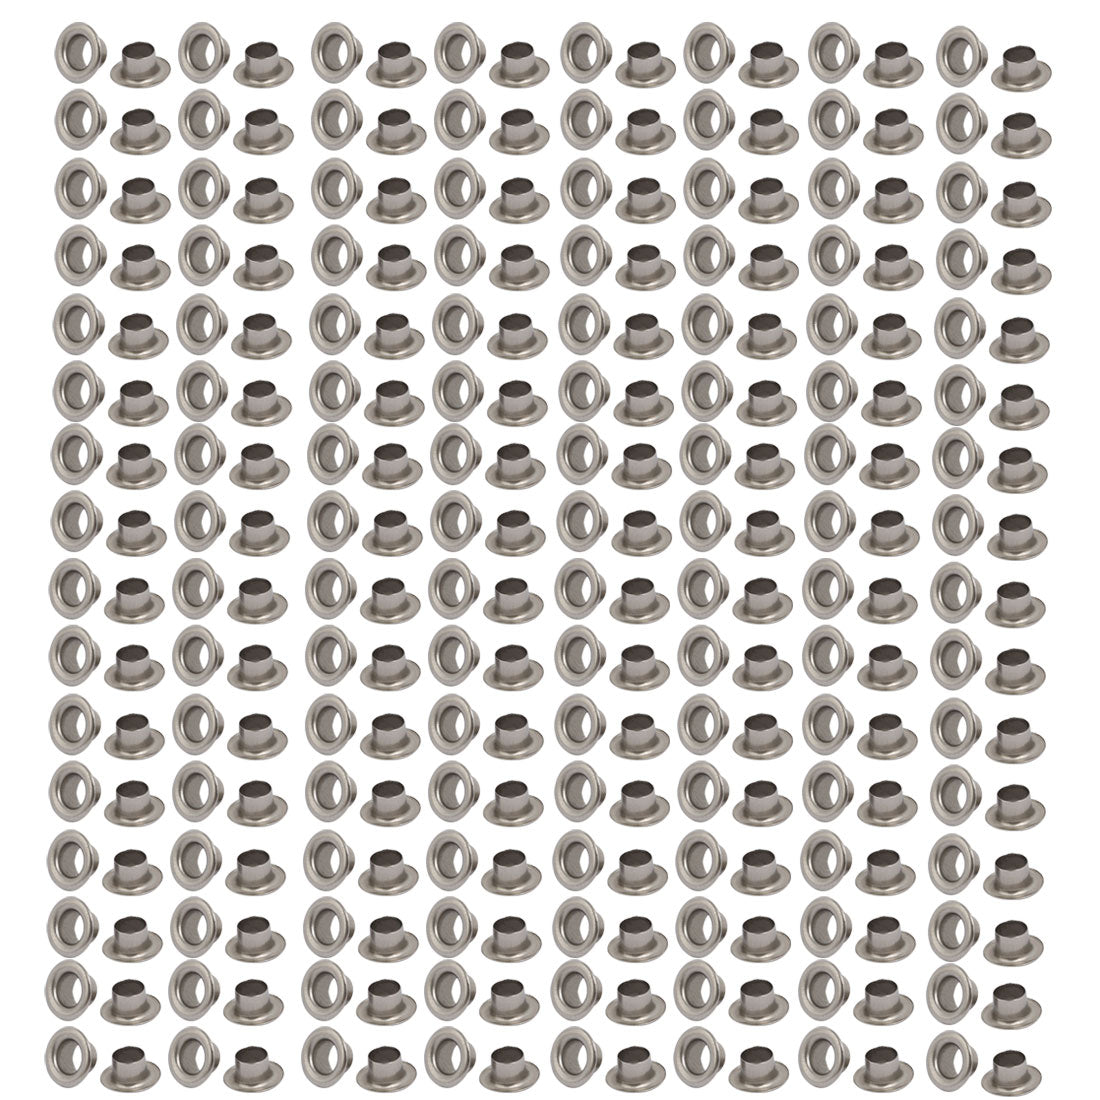 uxcell Uxcell 500pcs 4mm Inner Dia 201 Stainless Steel Eyelet Grommets Kit w Washer for Leather Canvas Clothes Shoes